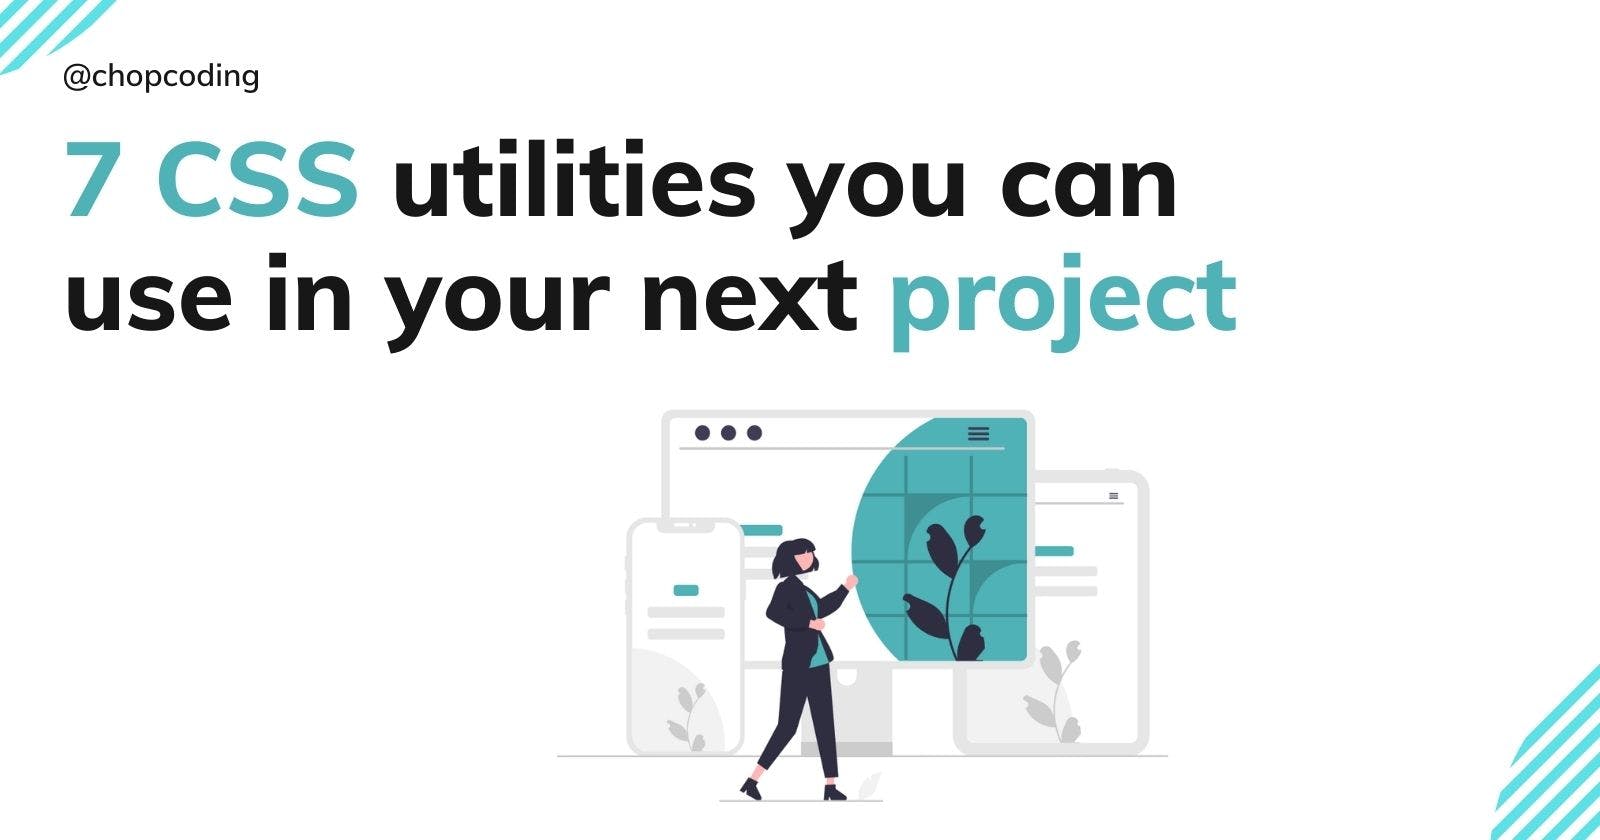 7 CSS utilities you can use in your next project